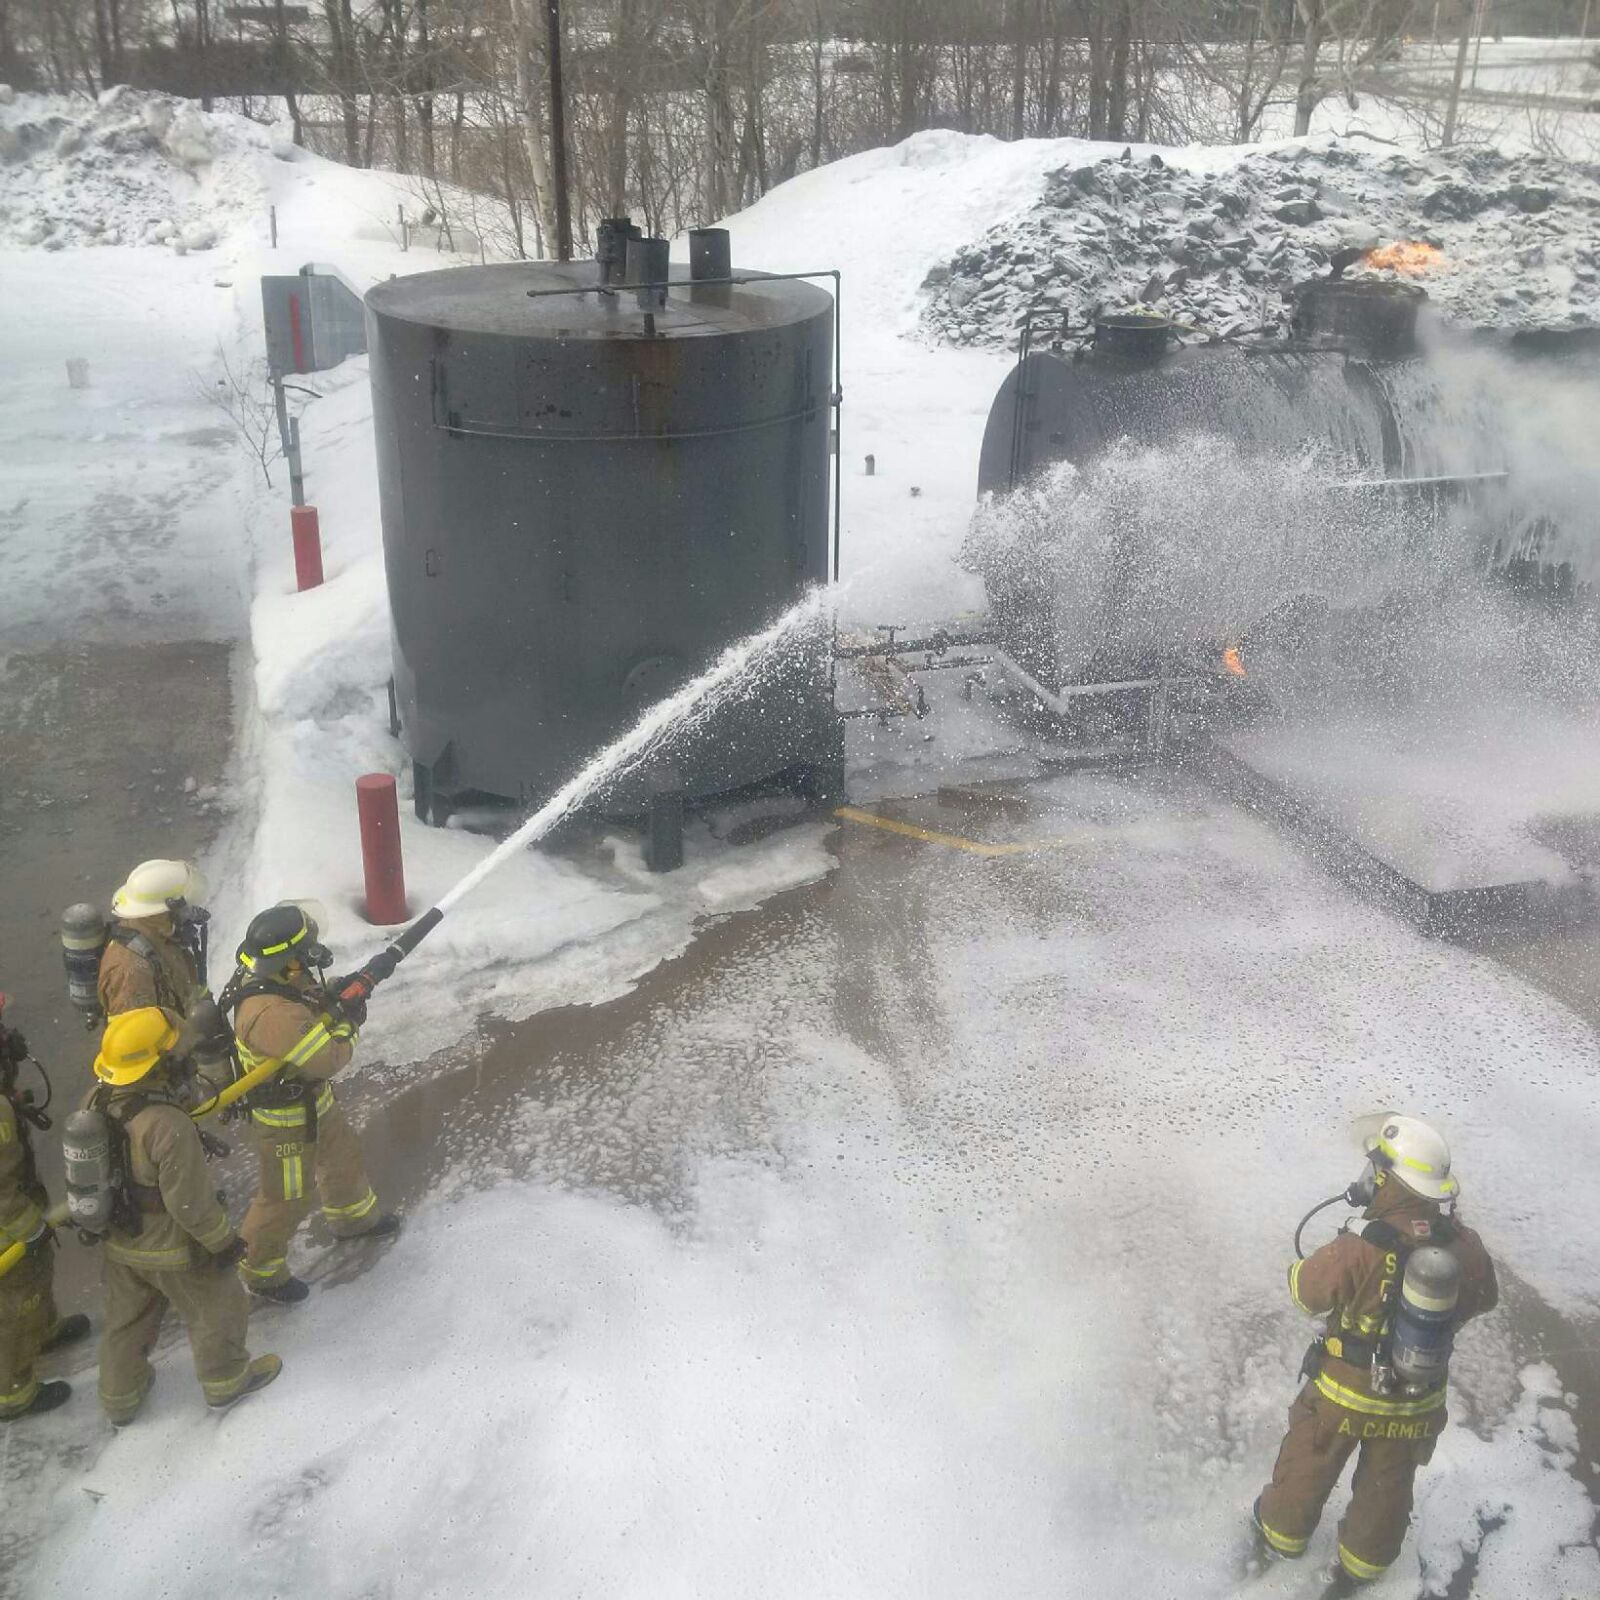 Firefighters use foam to extinguish crude oil fire.